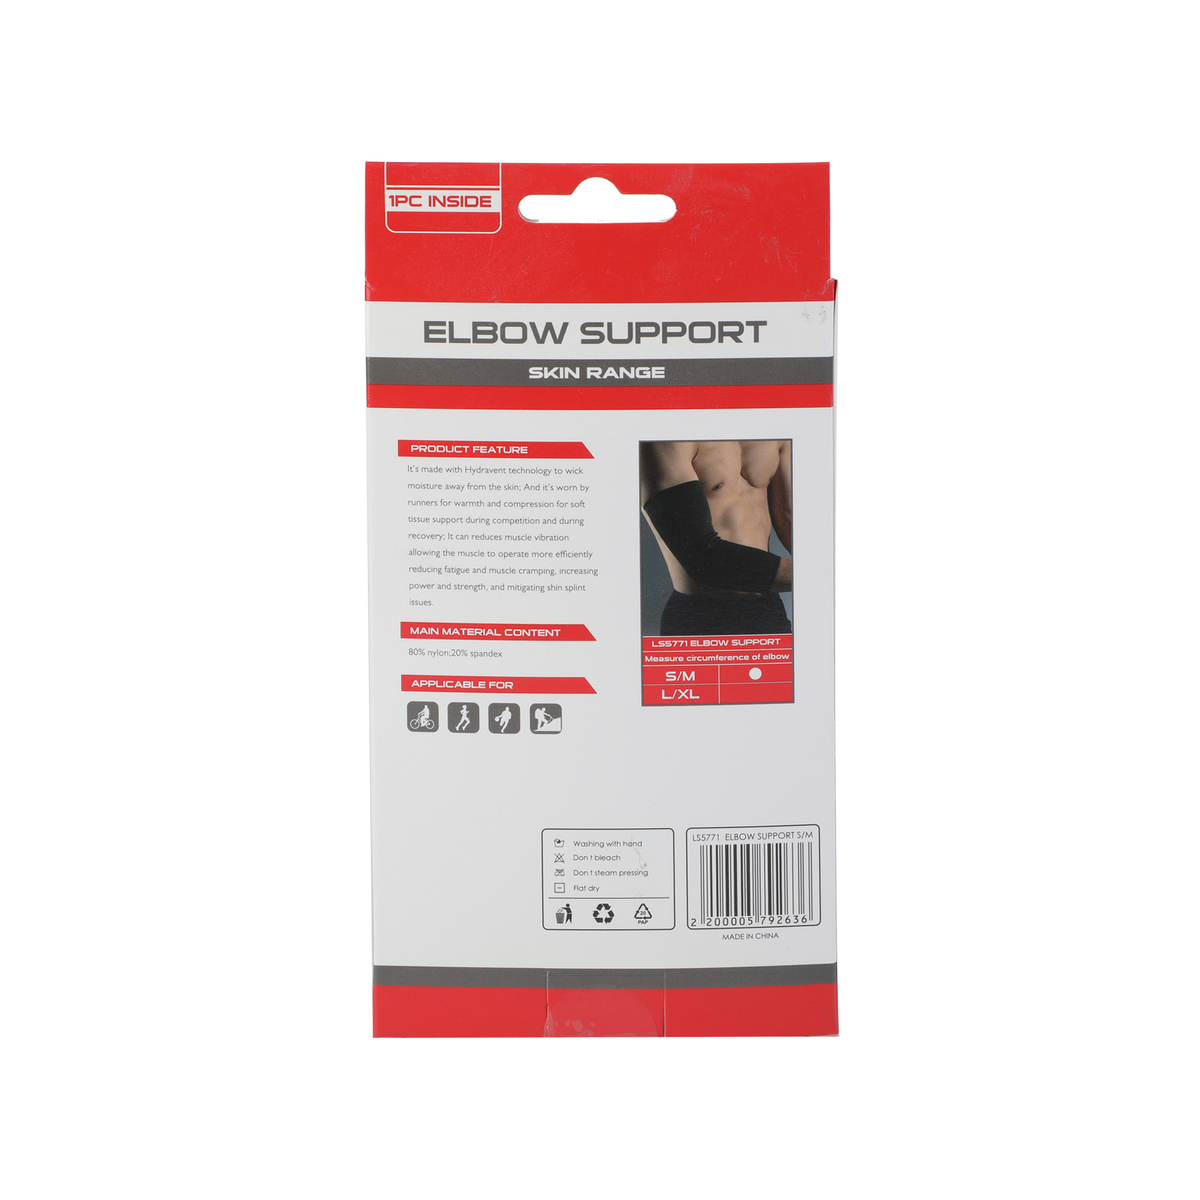 Sports Champion Elbow Support LS5771 Small